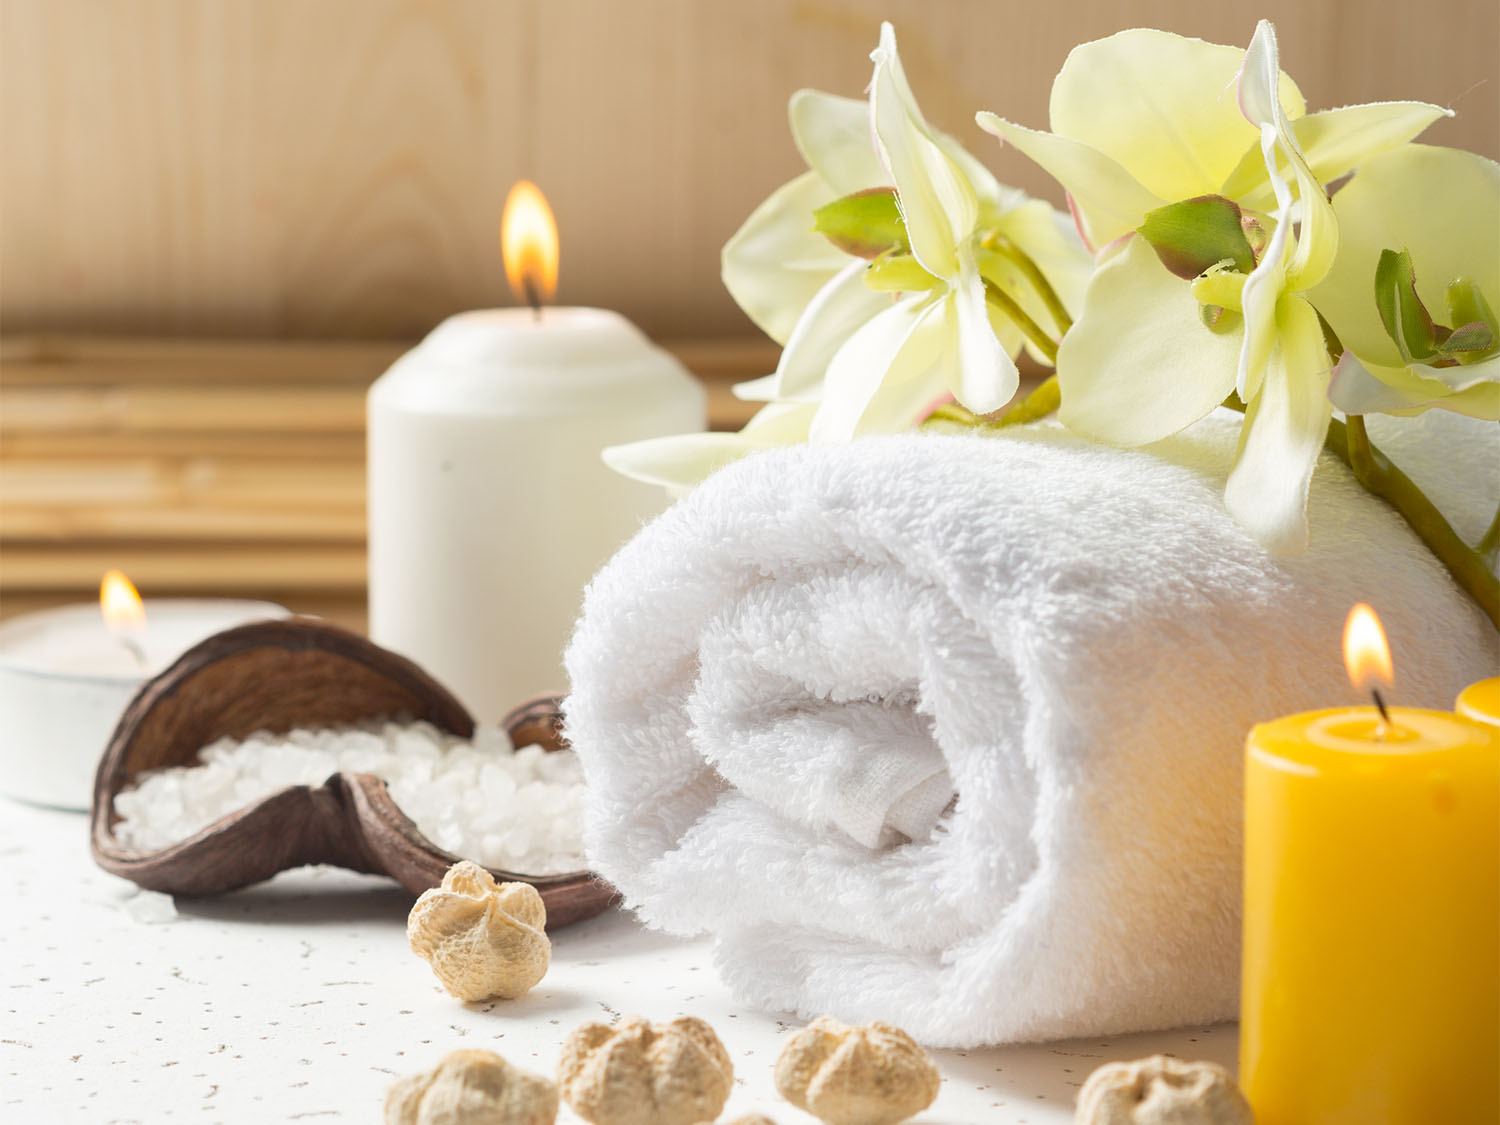 Spa and Well-Being Offers 